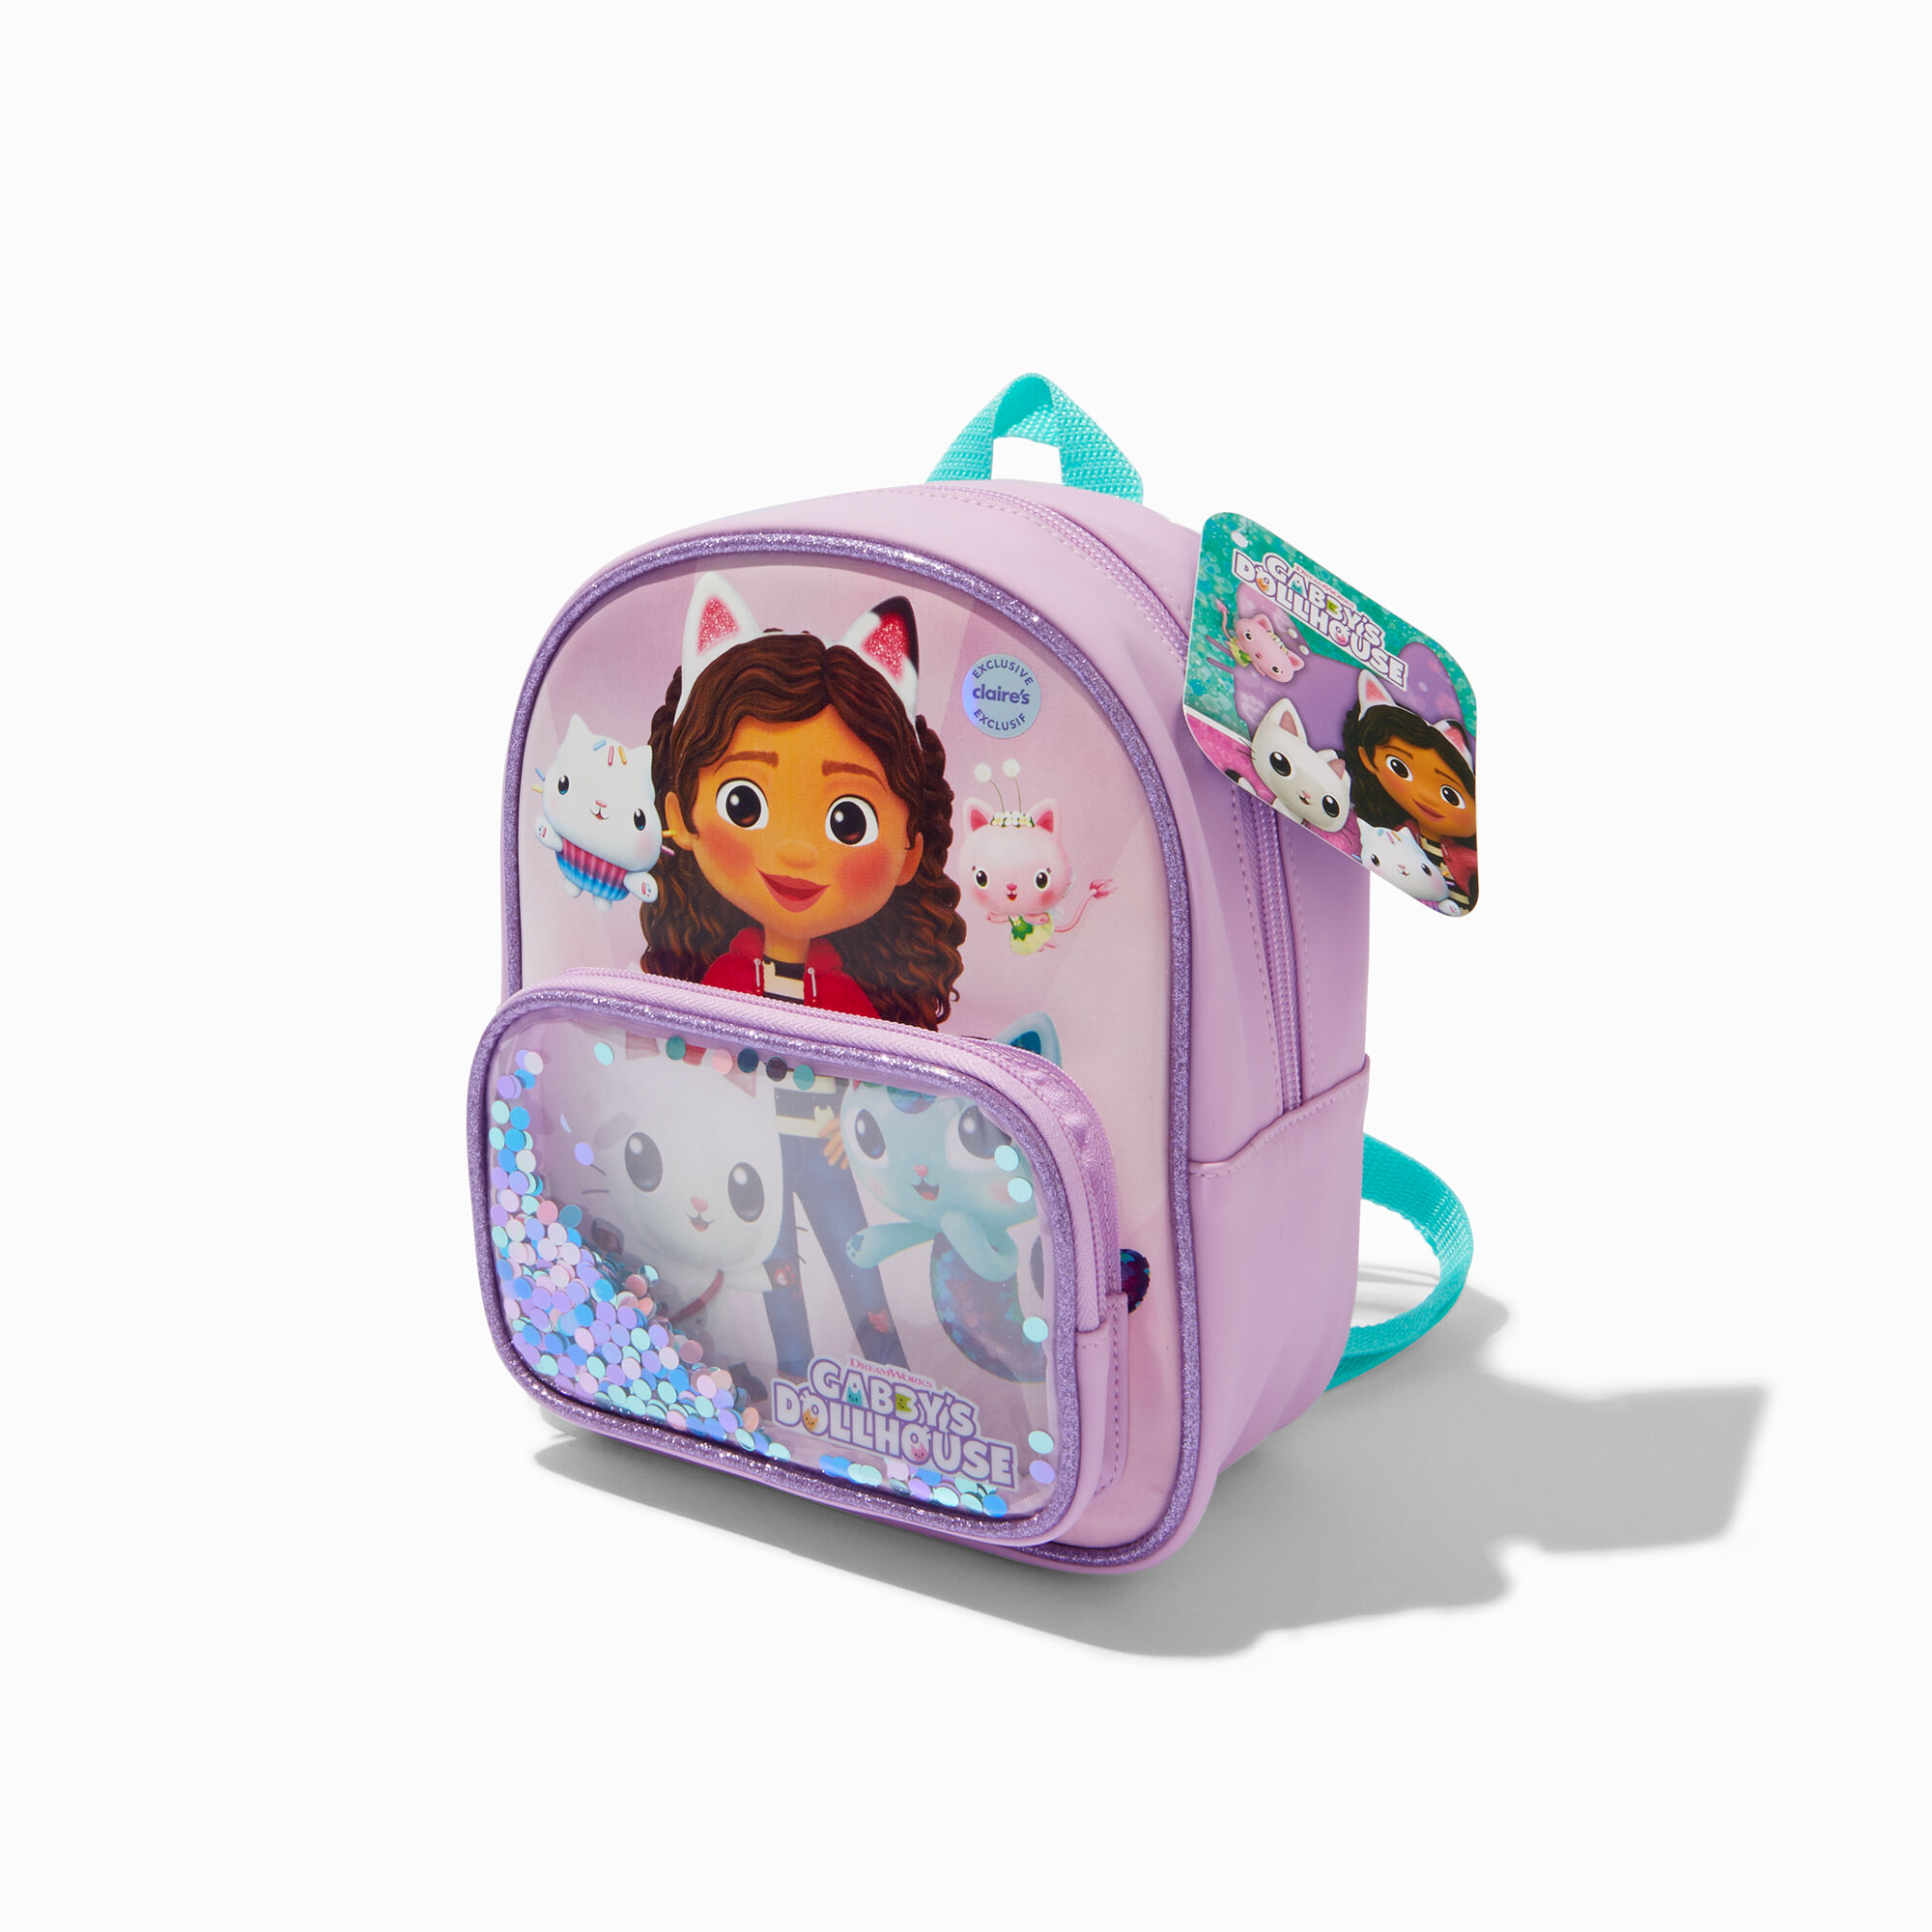 View Gabbys Dollhouse Claires Exclusive Mini Backpack information